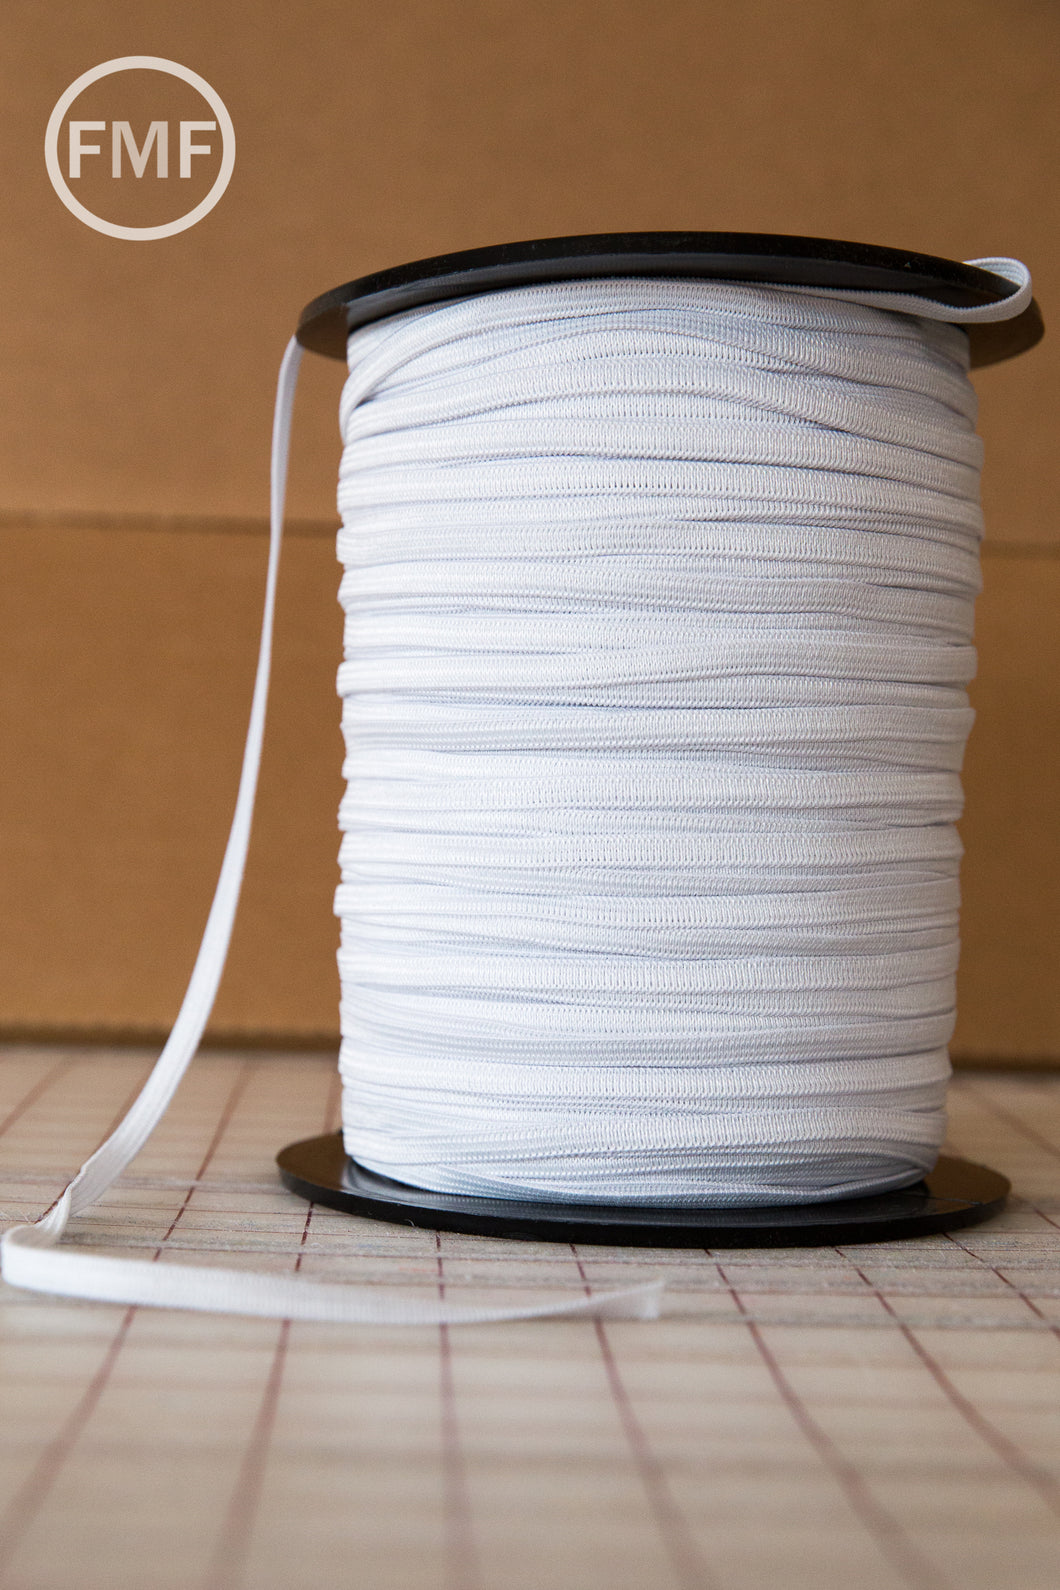 5MM White Elastic Trim, Sold by the Yard